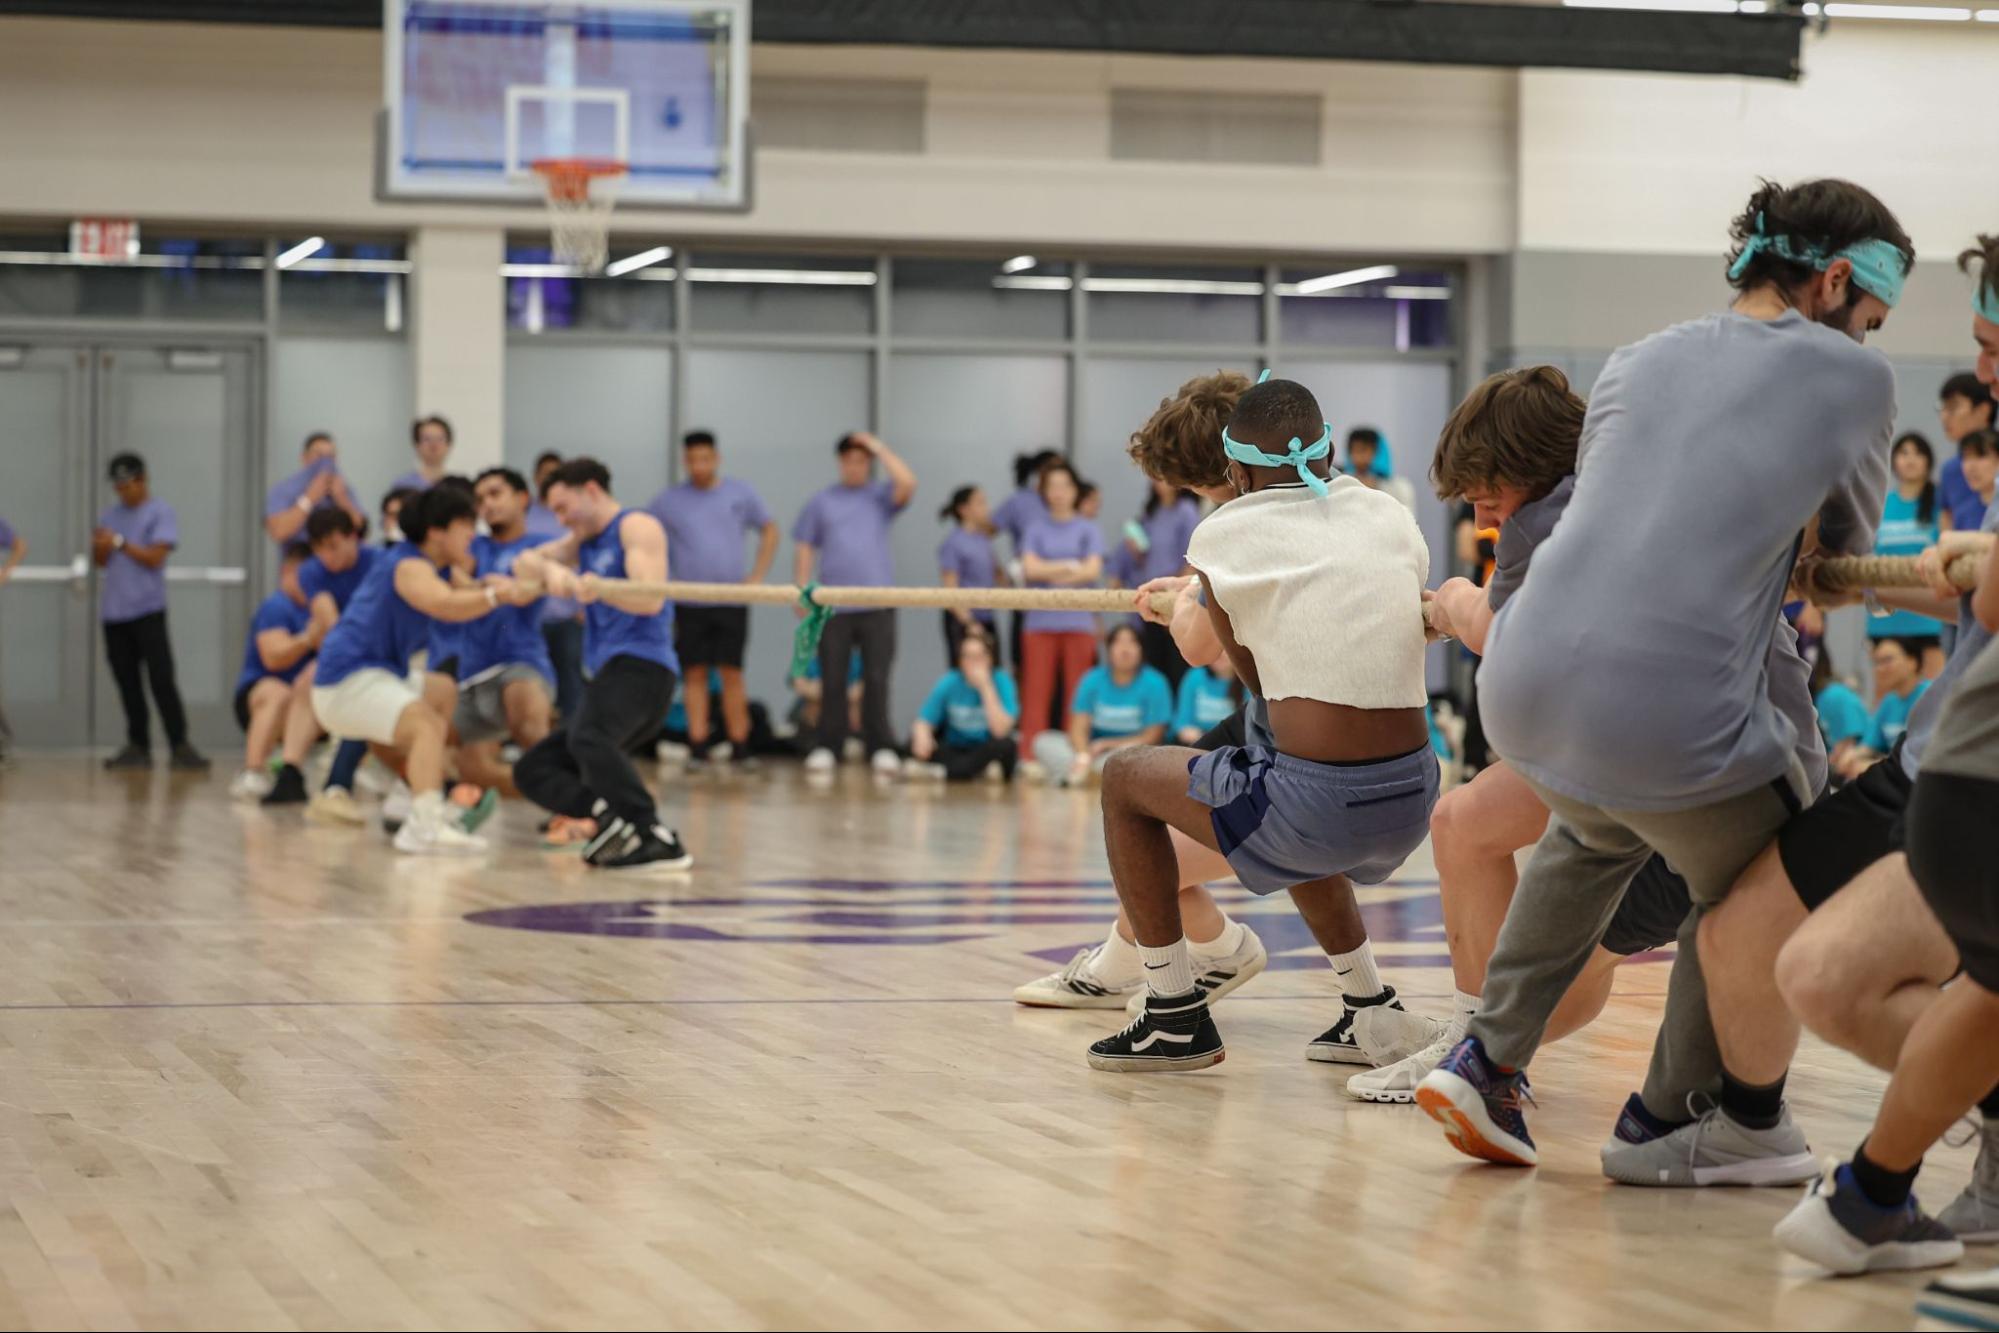 A team in blue and a team in gray play tug-of-war on a basketball court. The teams pull from opposite sides of a beige rope with a green bandana tied in the middle.